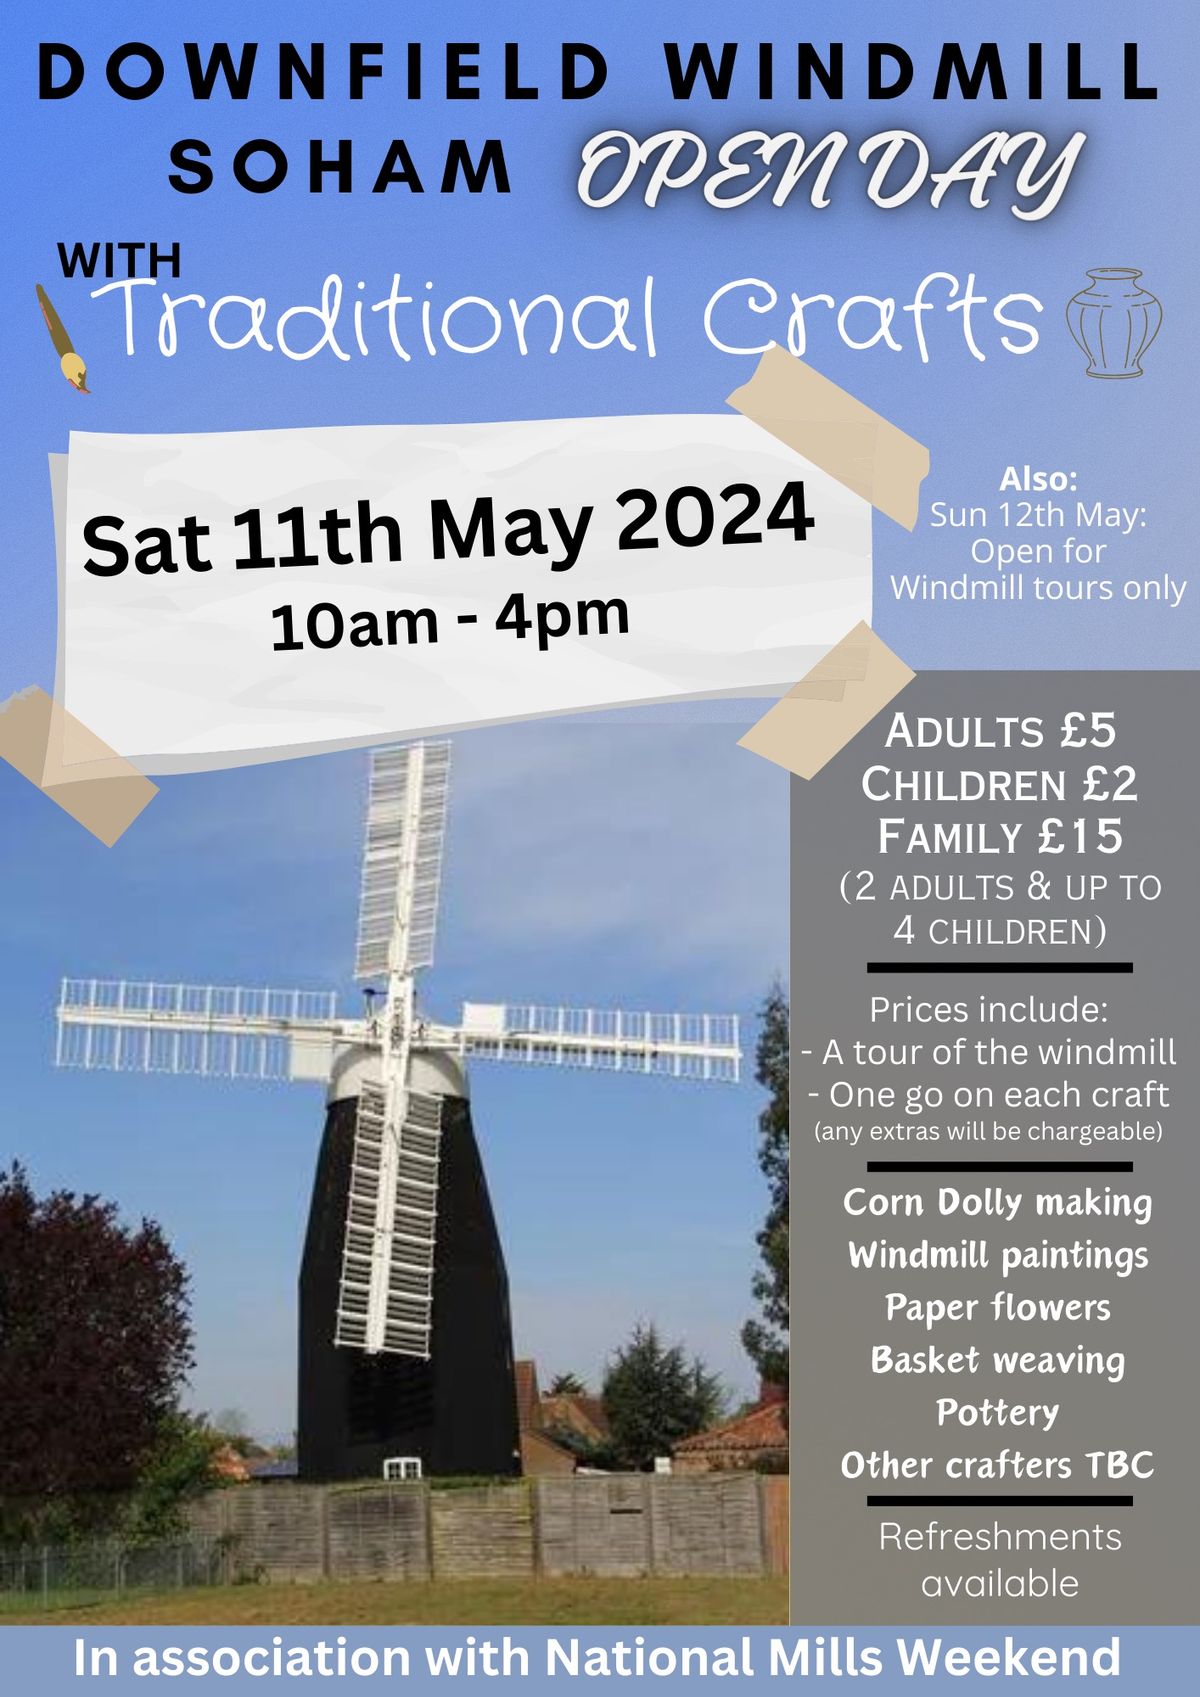 Downfield Windmill, Soham, open day and traditional craft session